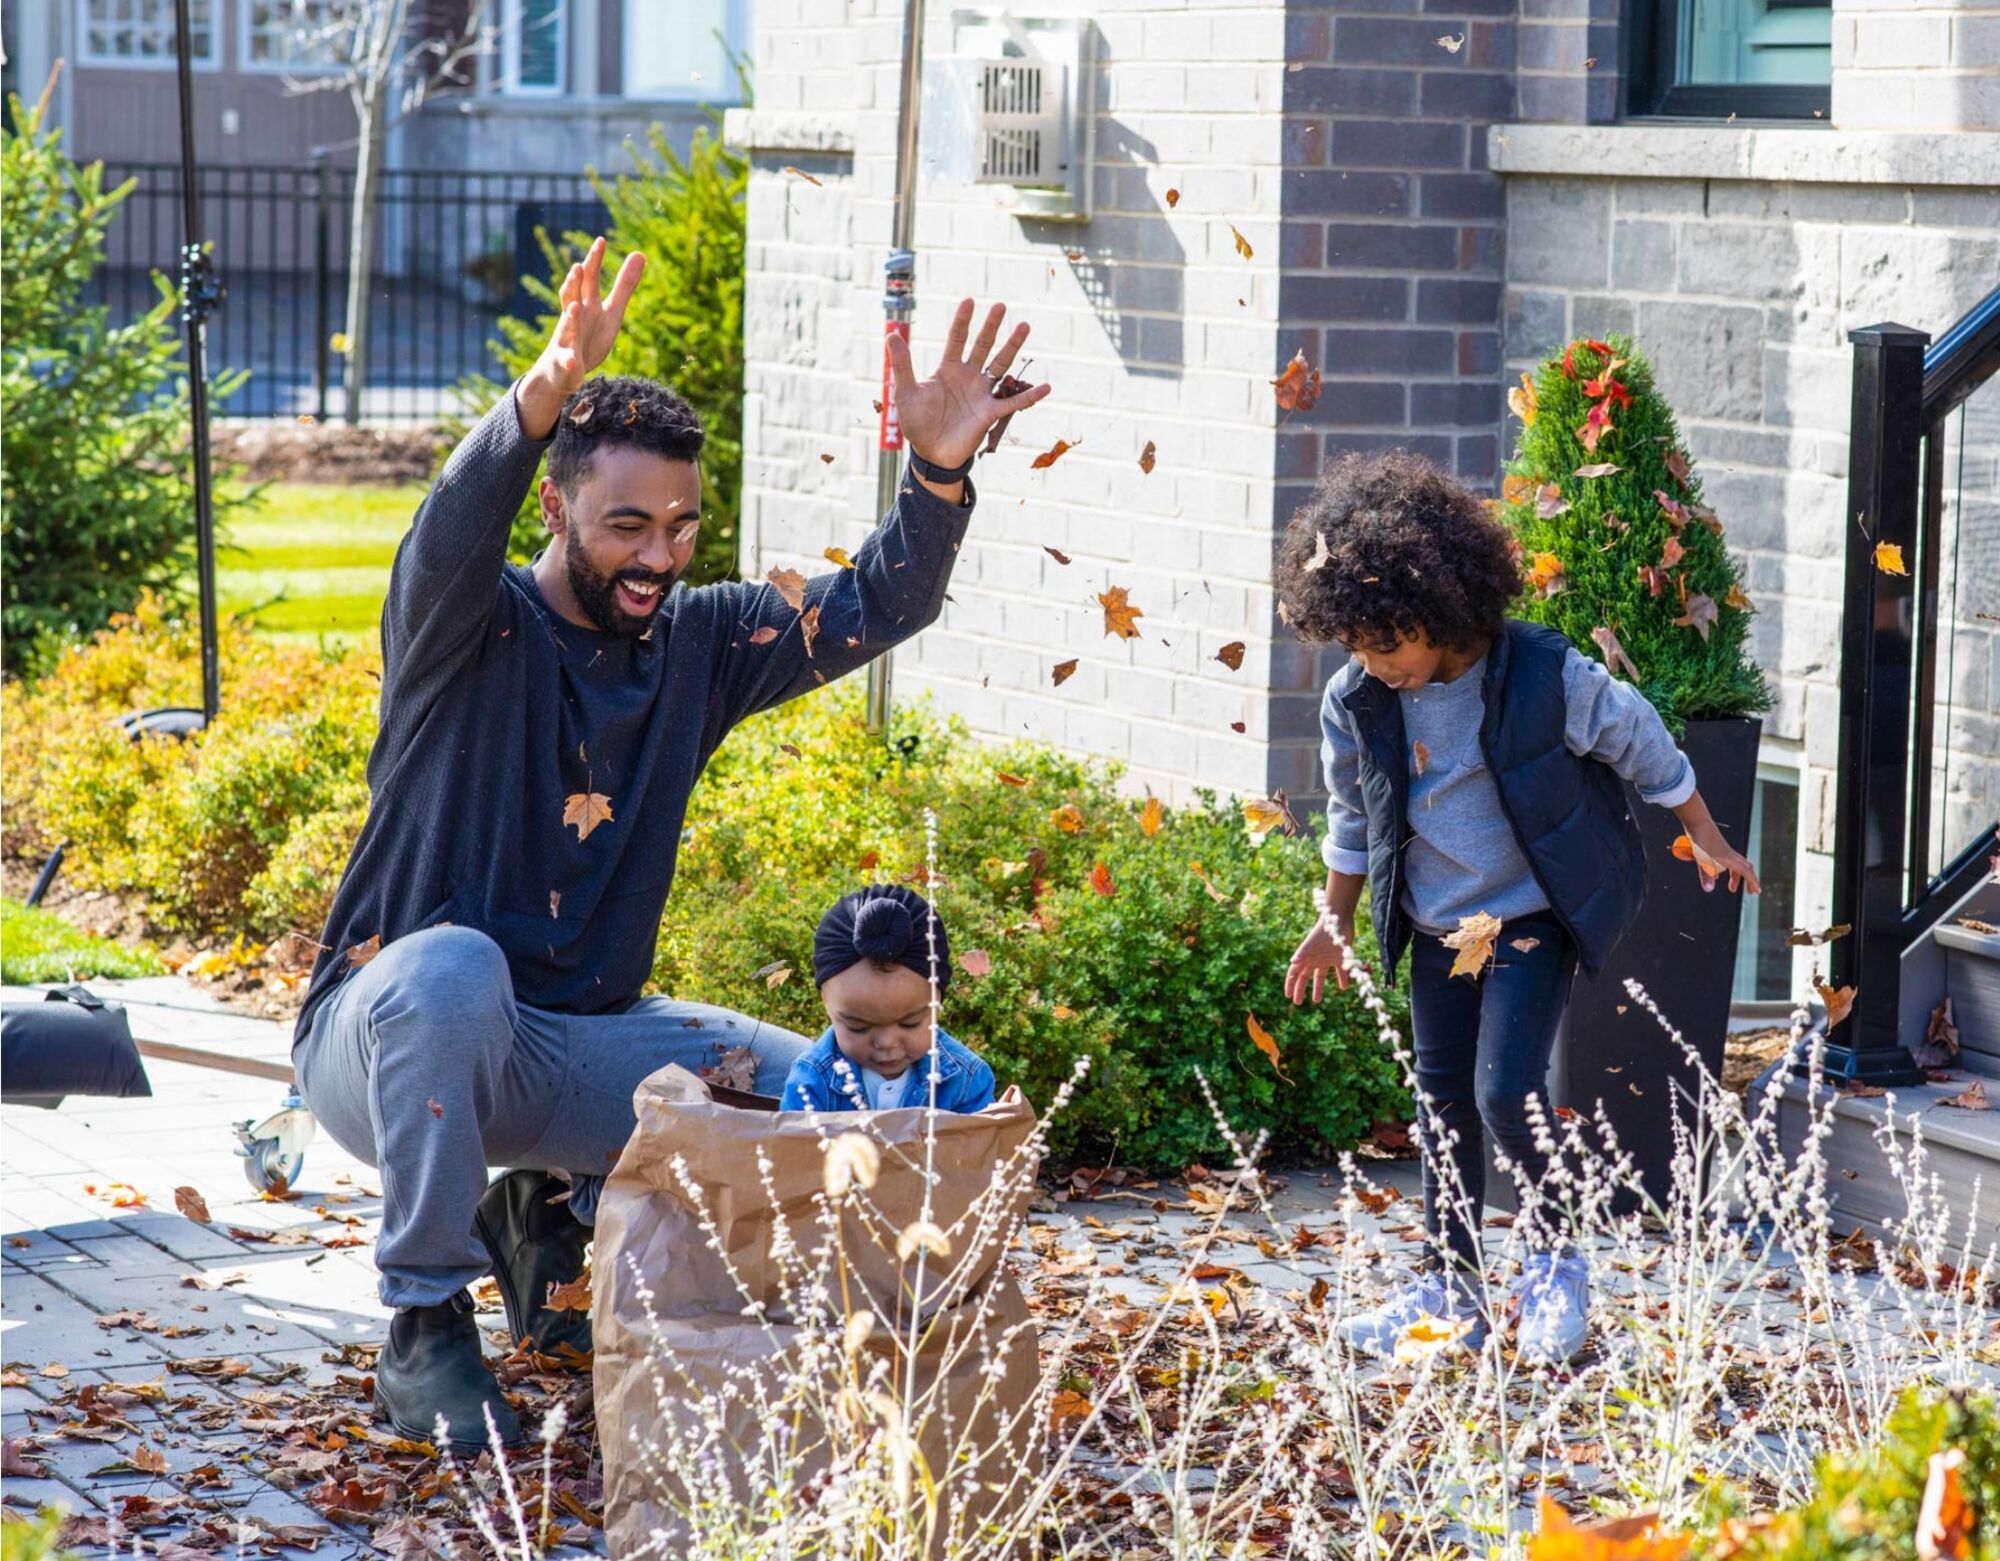 A father and his two children playing in the front yard, throwing leaves up in the air during the fall season.